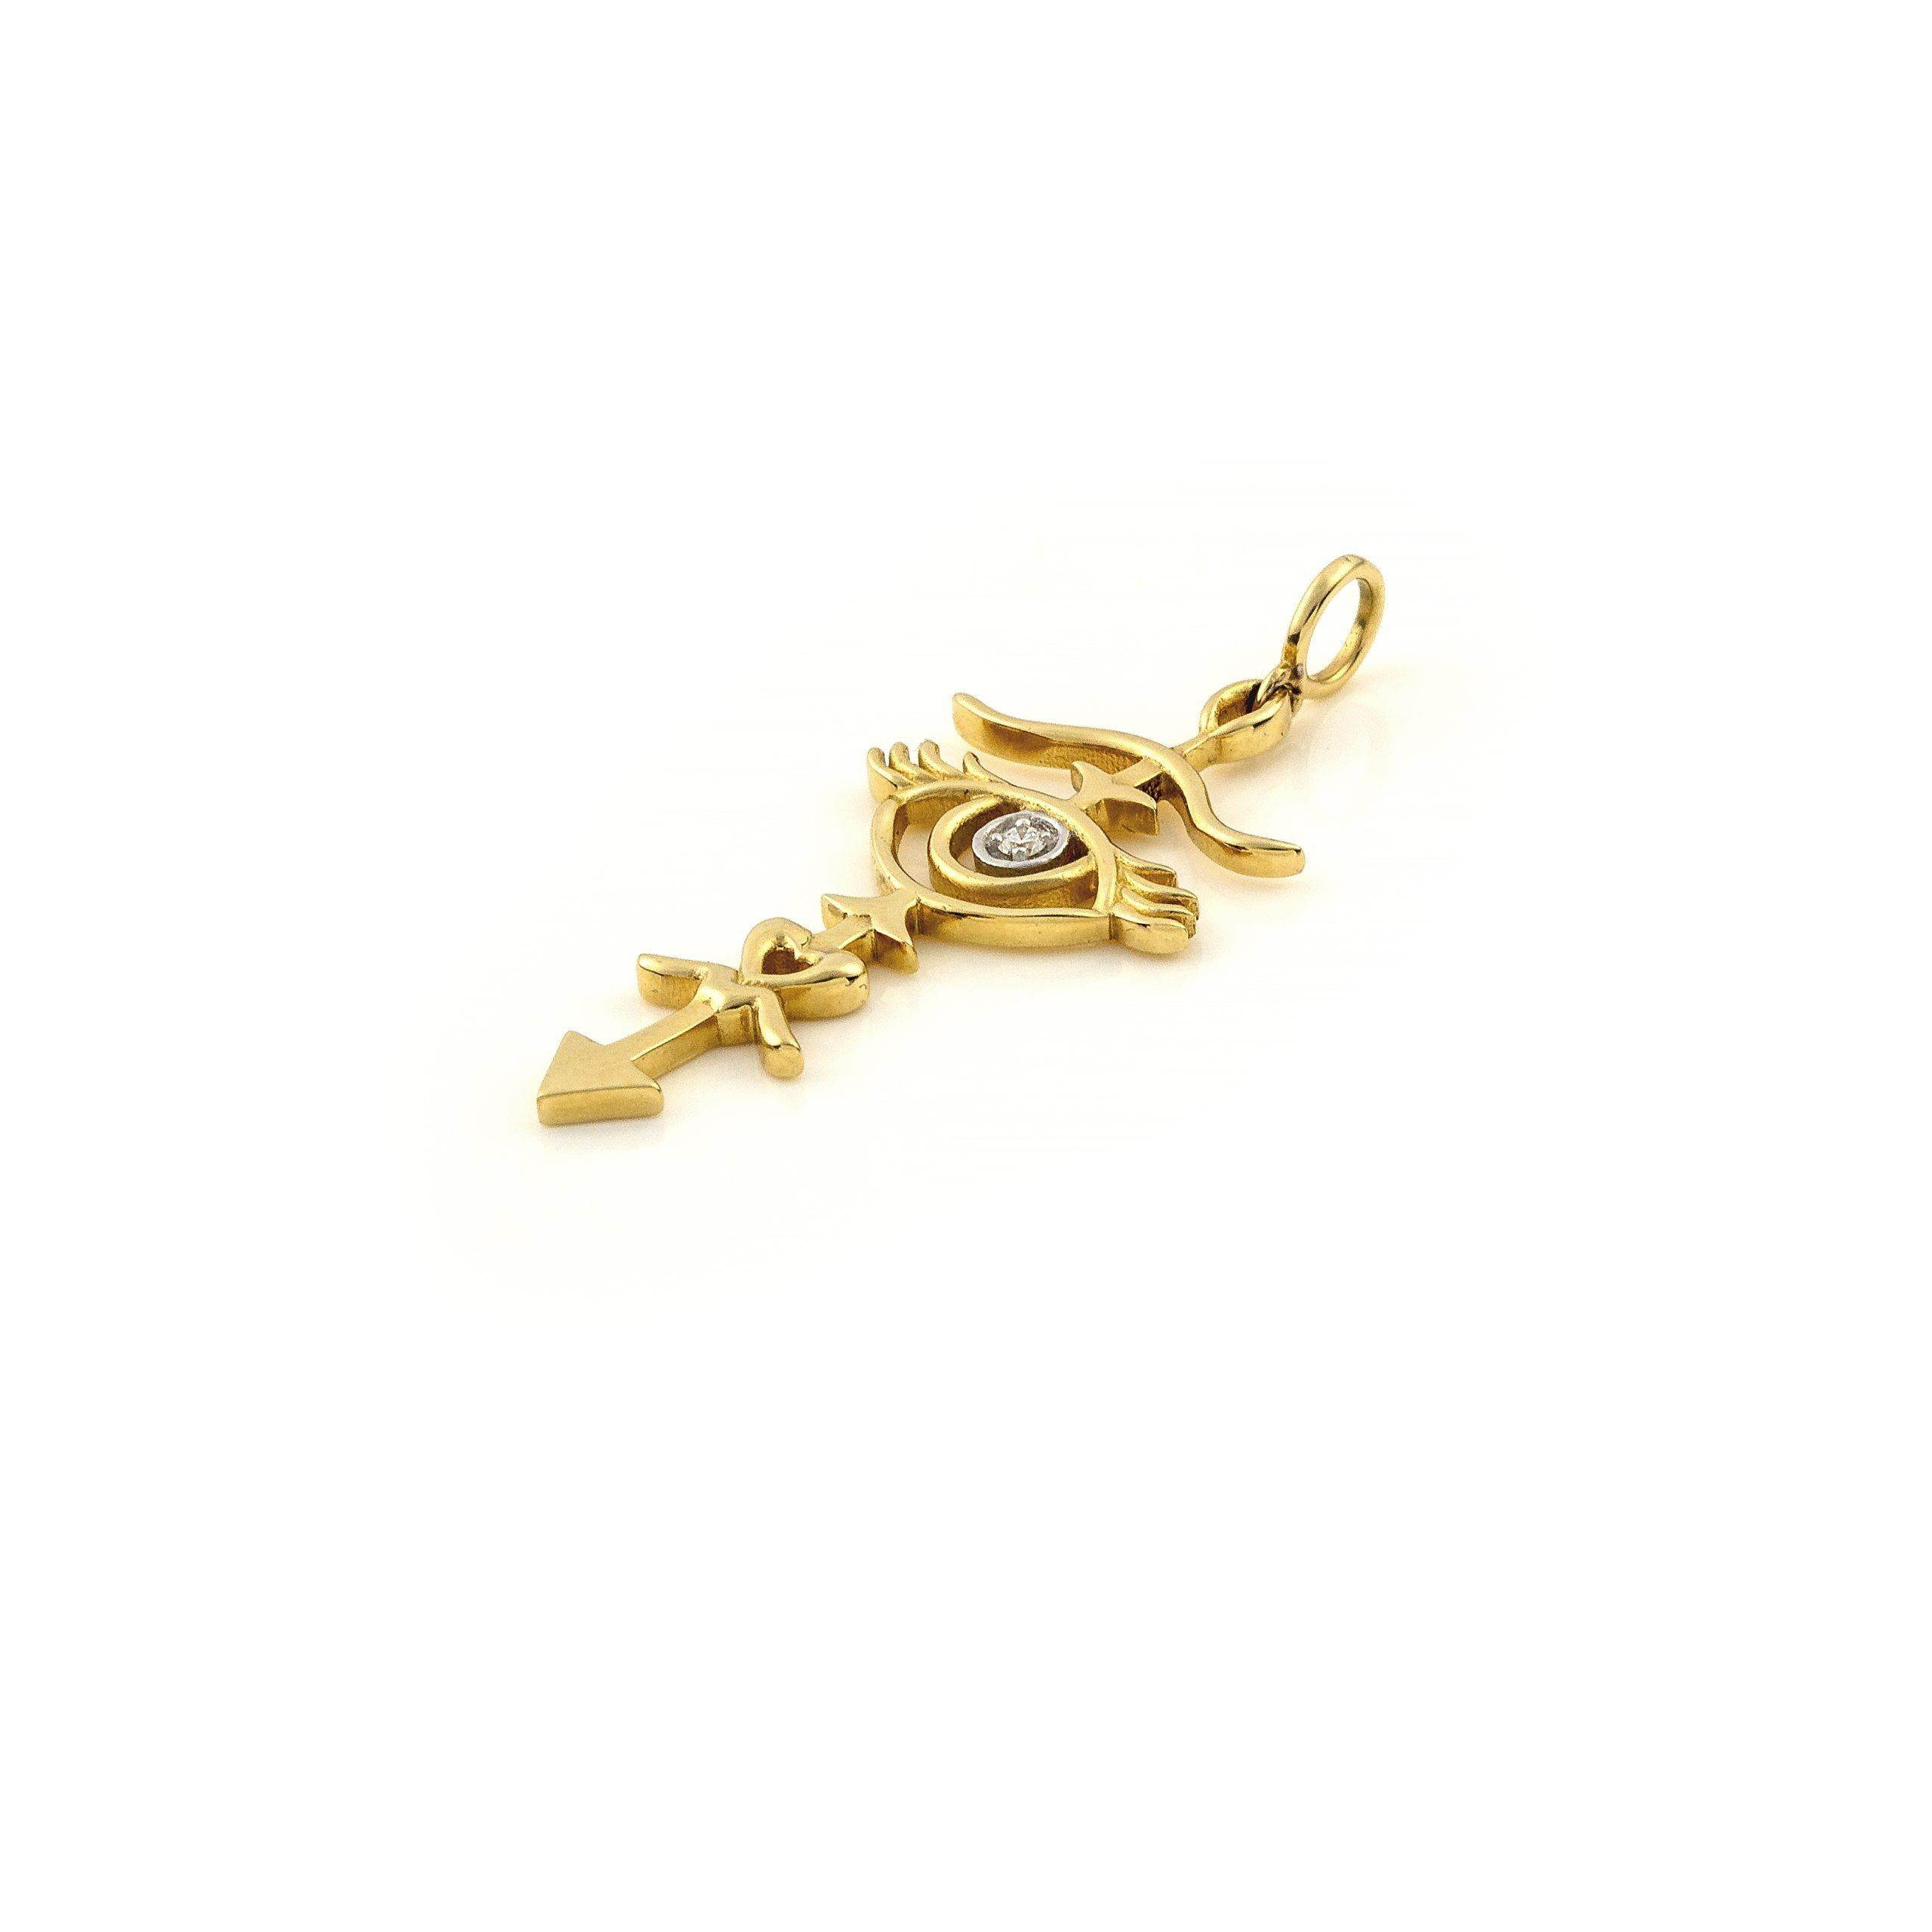 Recycled 14K Yellow Gold

Diamonds Approx. 0.02 ct

Jewel Size:4.1×2 cm/ 1.61x 0.78 inches
The pendant is sold WITHOUT a chain.

Evil Eye Pendant in Gold and Diamonds.

This will protect you from all evil…

A groundbreaking collection, Mythology,